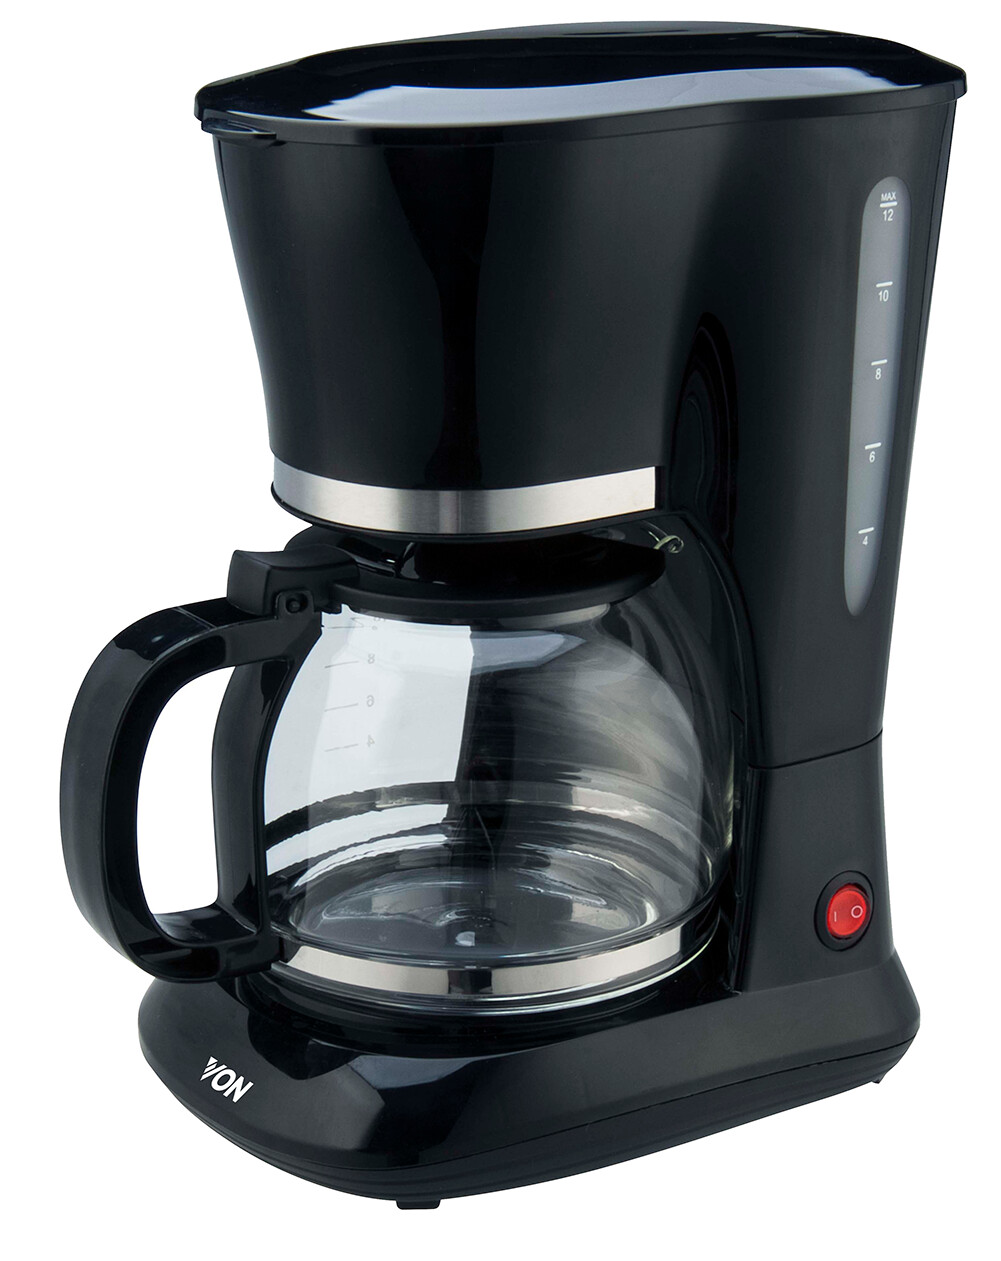 Von 12 Cup Drip Coffee Maker with Keep Warm Function - VSCD12MVK Coffee Maker